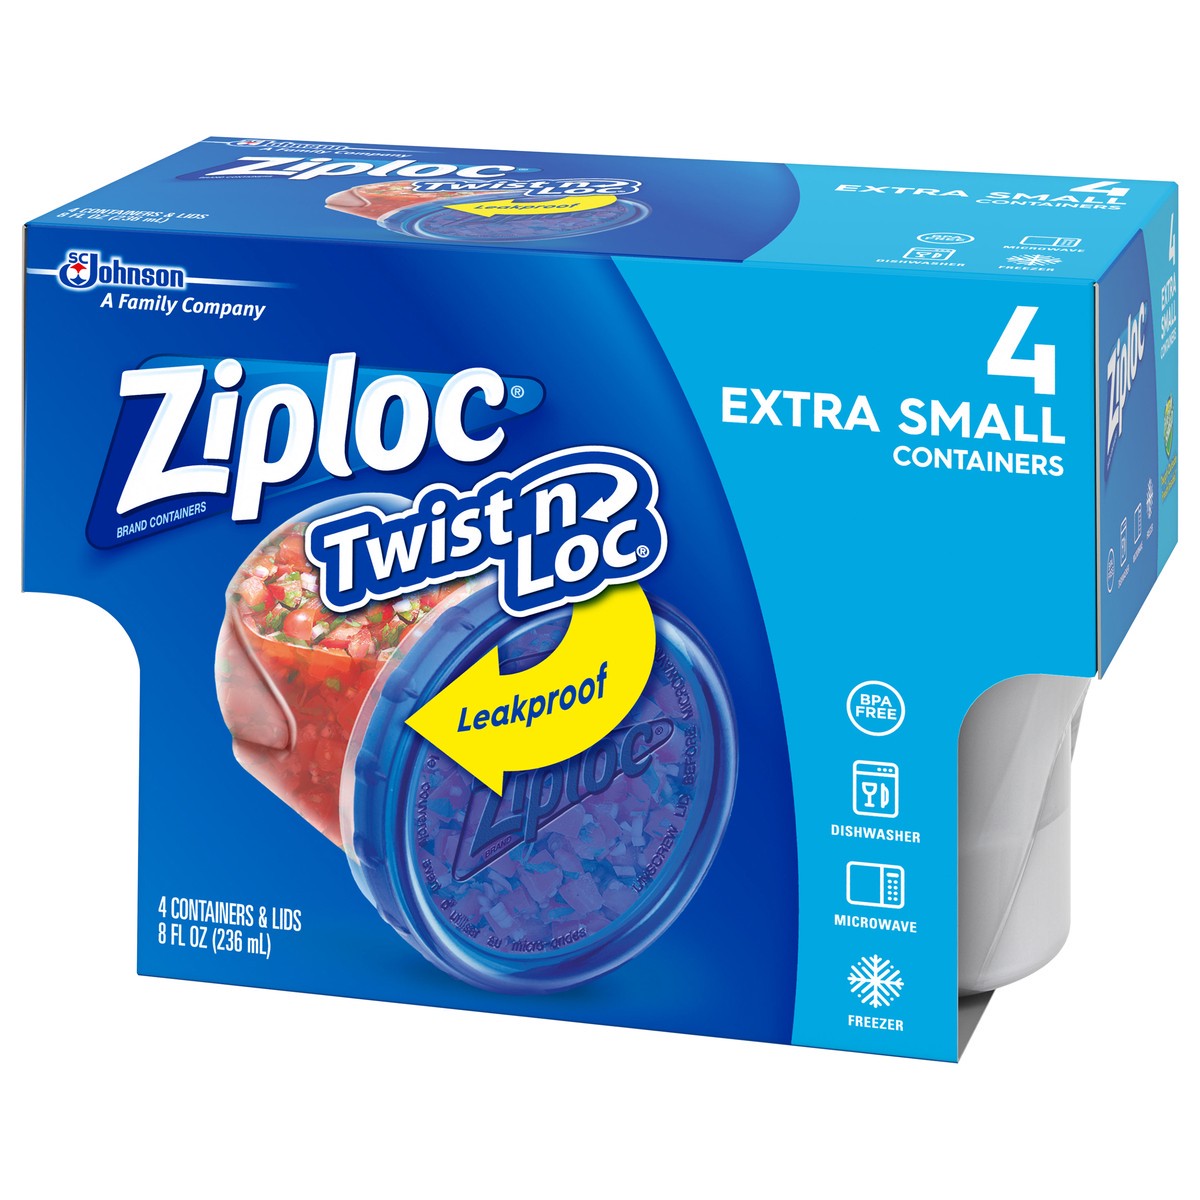 slide 8 of 8, Ziploc Twist'n Loc Extra Small Containers & Lids 4 ea, 4 ct